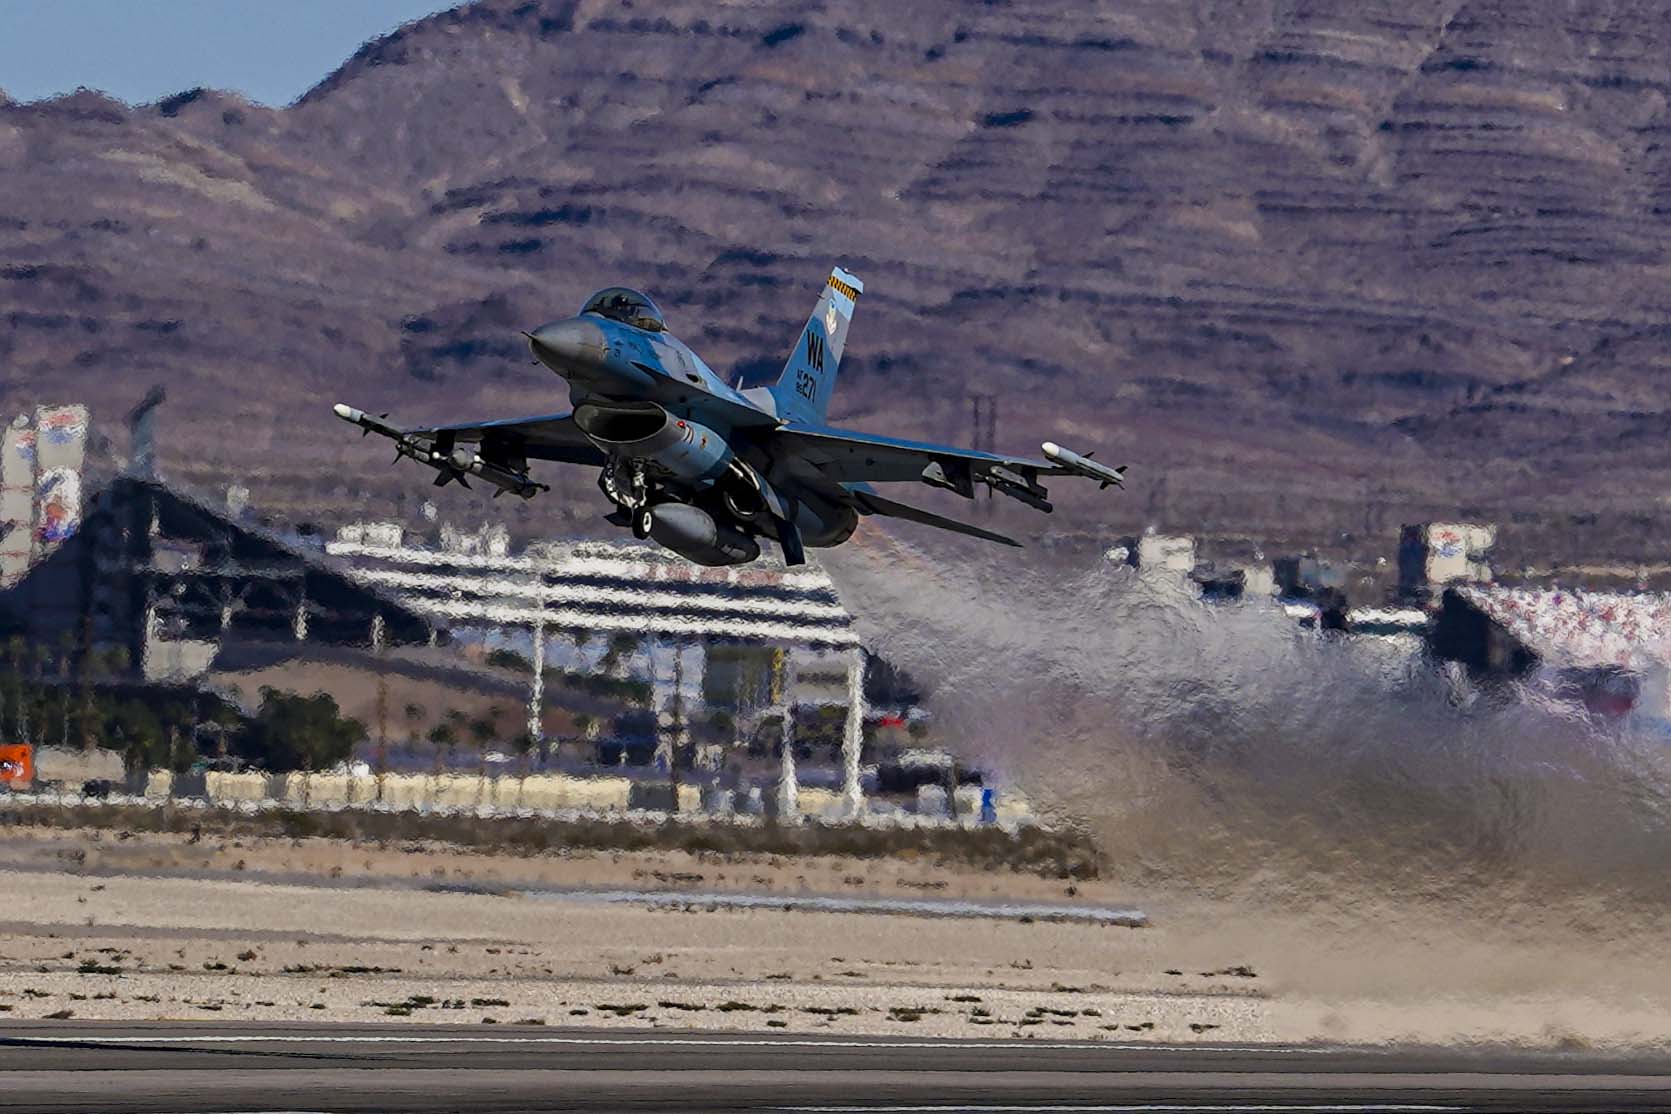 F-16 Fighting Falcon, US Air Force, Takes Off At Nellis Air Force Base